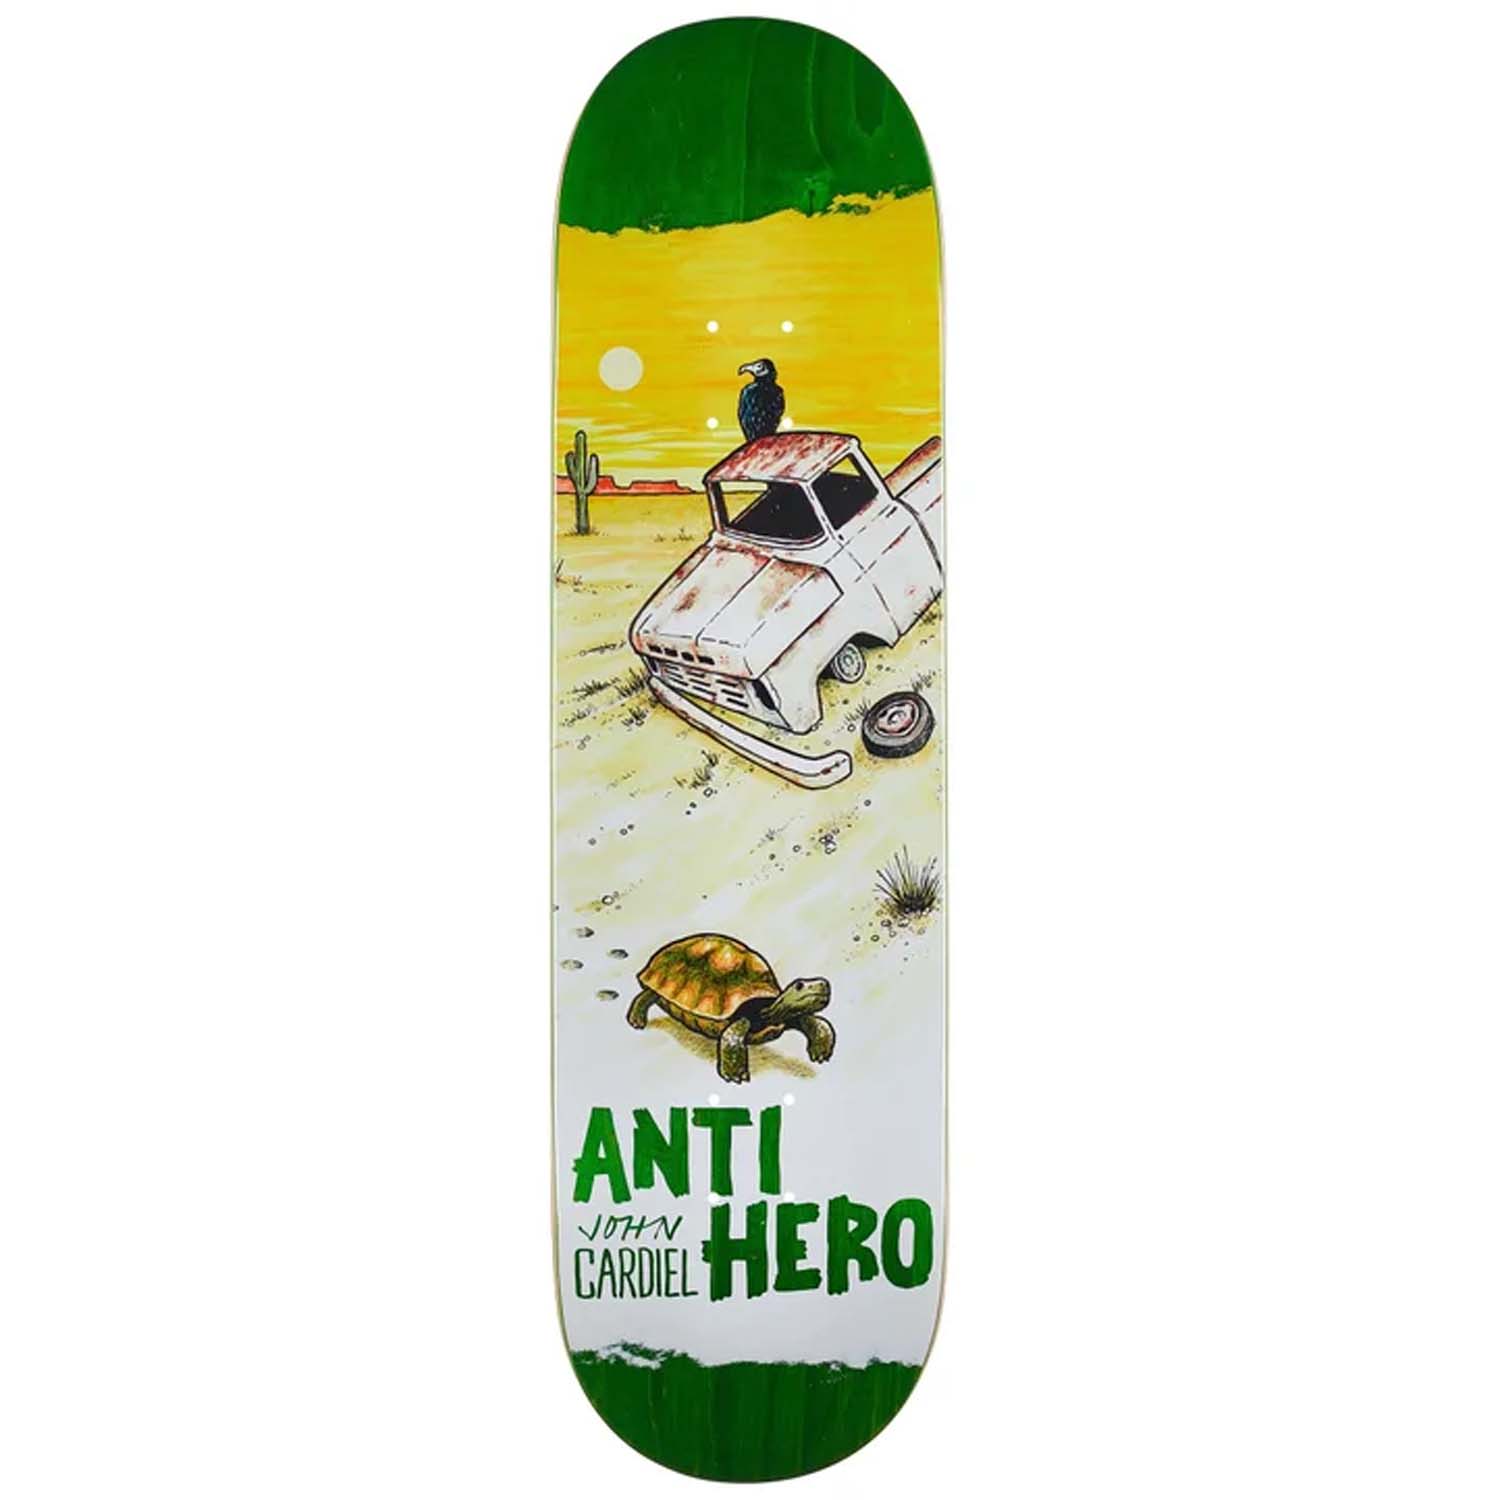 Antihero Cardiel Pro deck with Desert scene. This board is 8.62 inches in width and 32.25 inches in length.